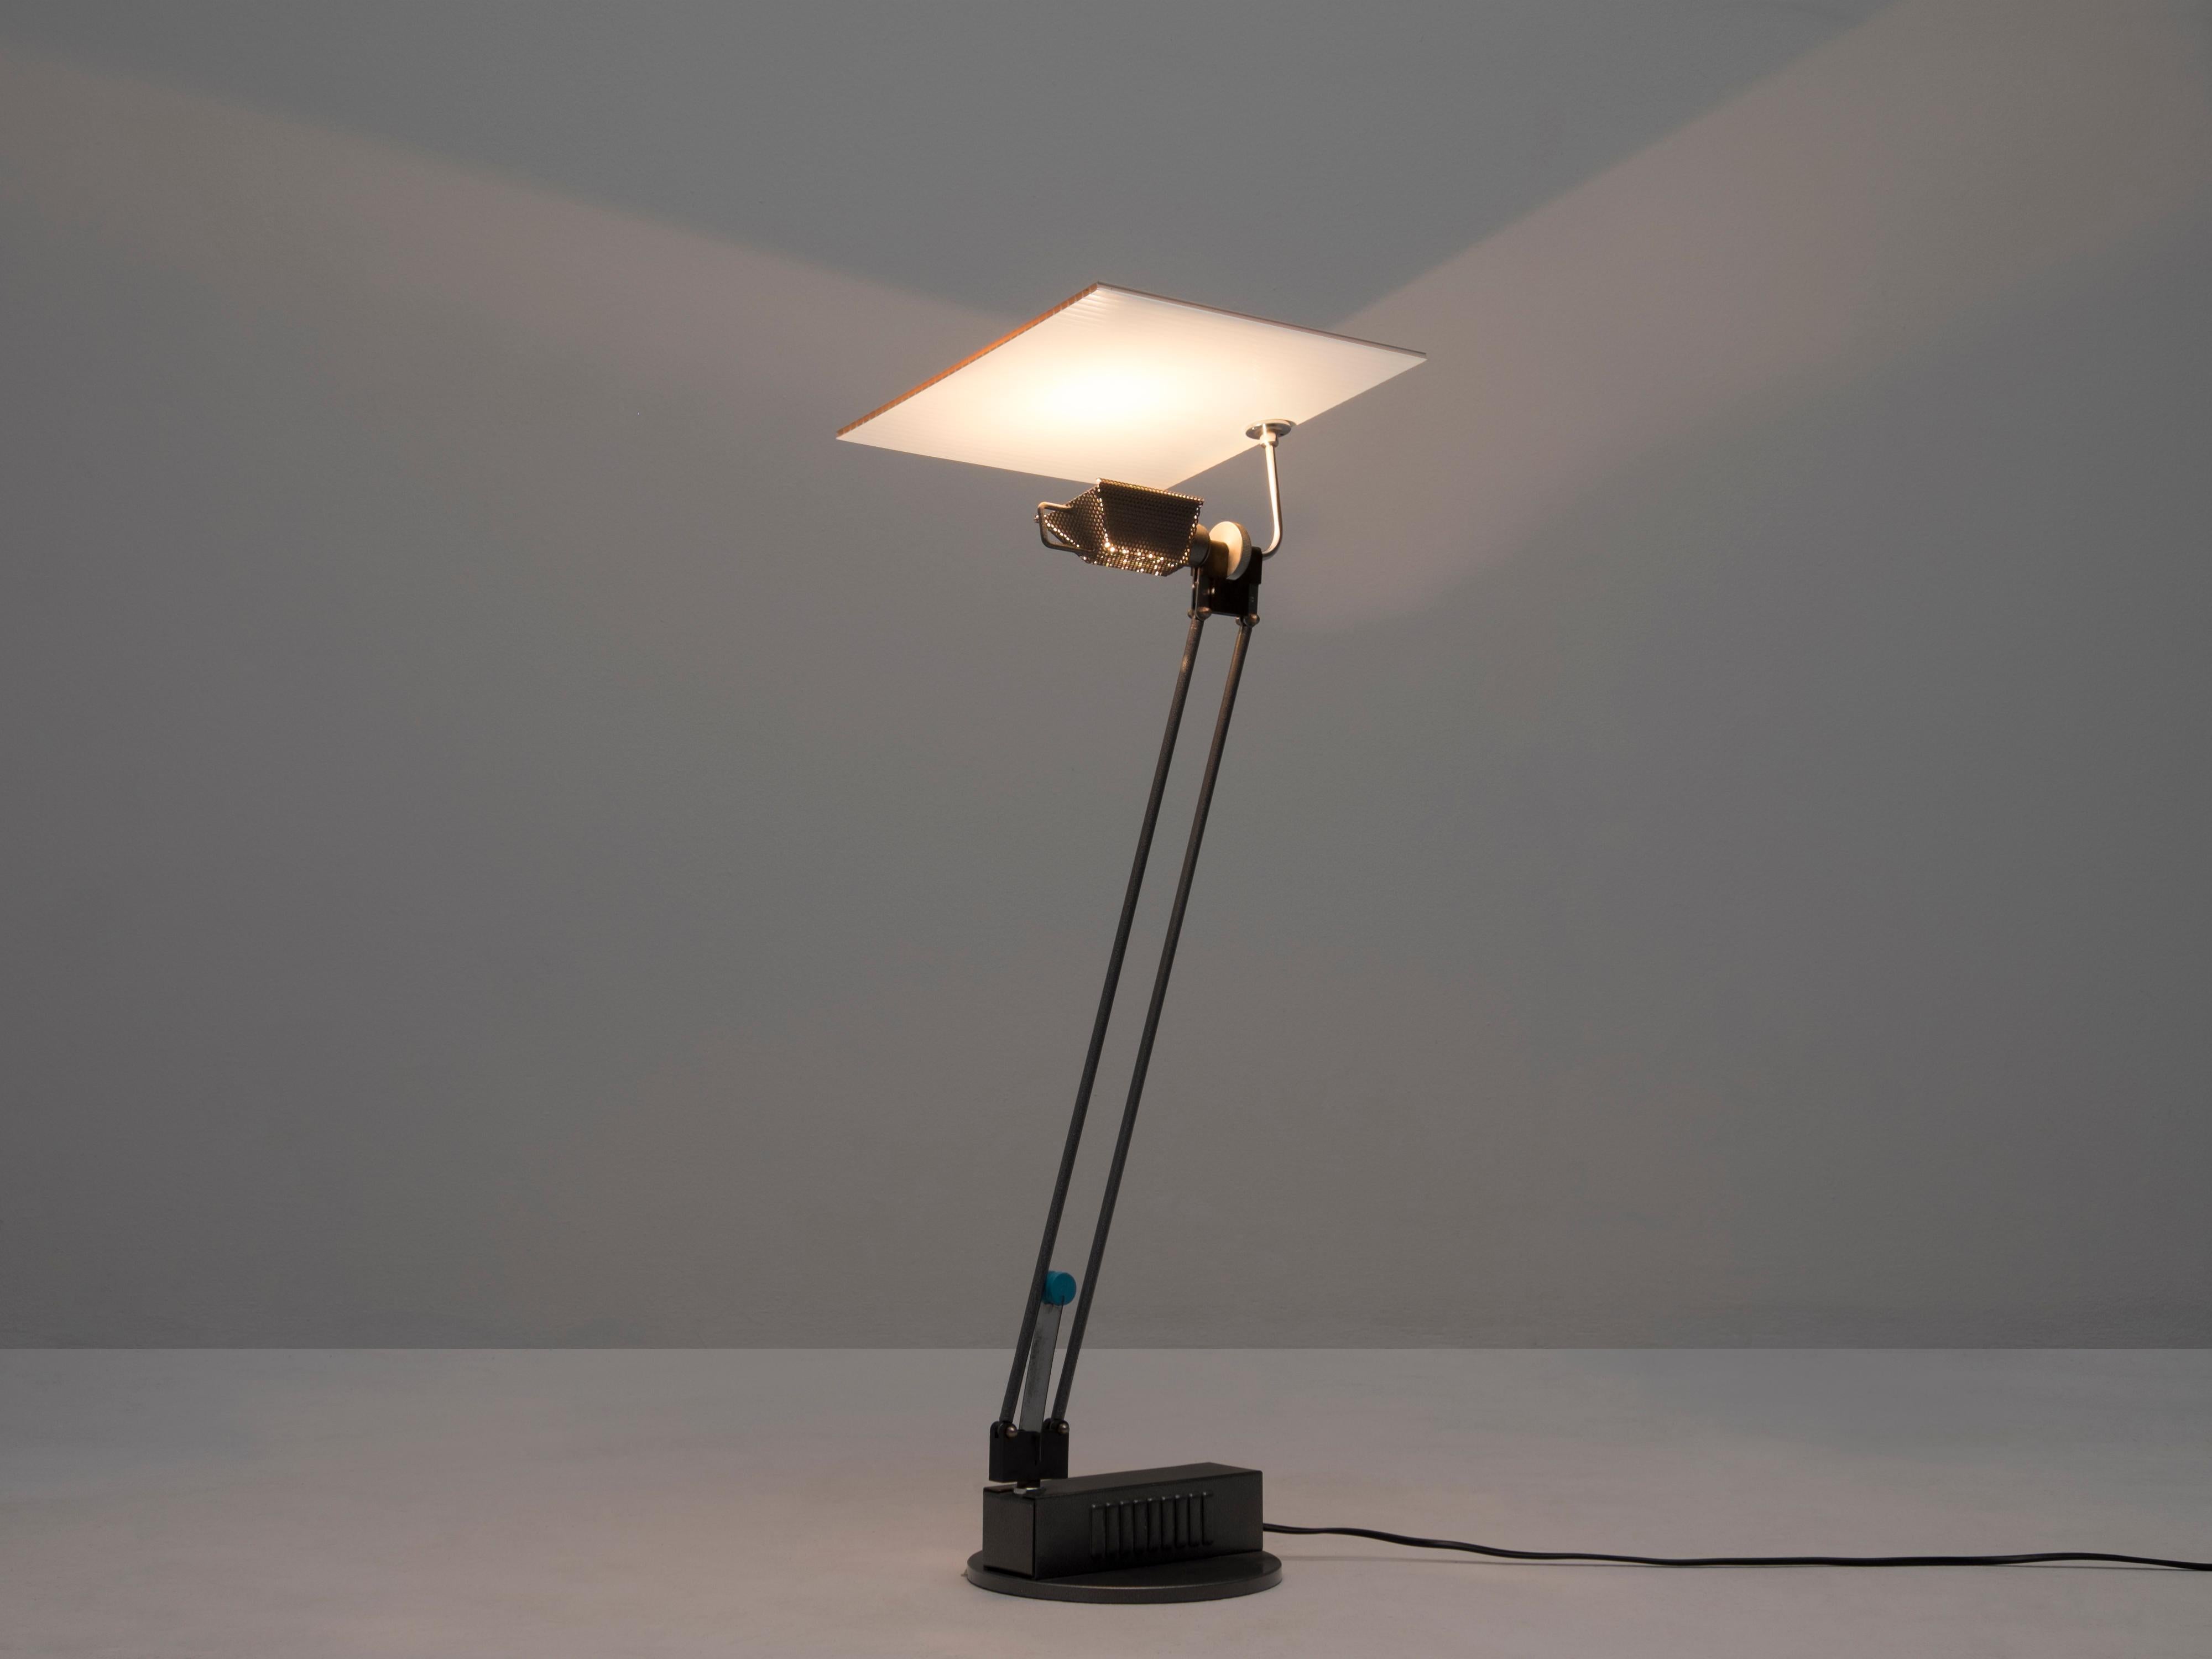 Sacha Kettof Manufactured for Aluminor, table lamp, makrolon, France, 1985

Table Lamp 'W&O' Sacha Kettof Manufactured for Aluminor divided over two colors, black and dark grey. These lights are very versatile and can be adjusted into various